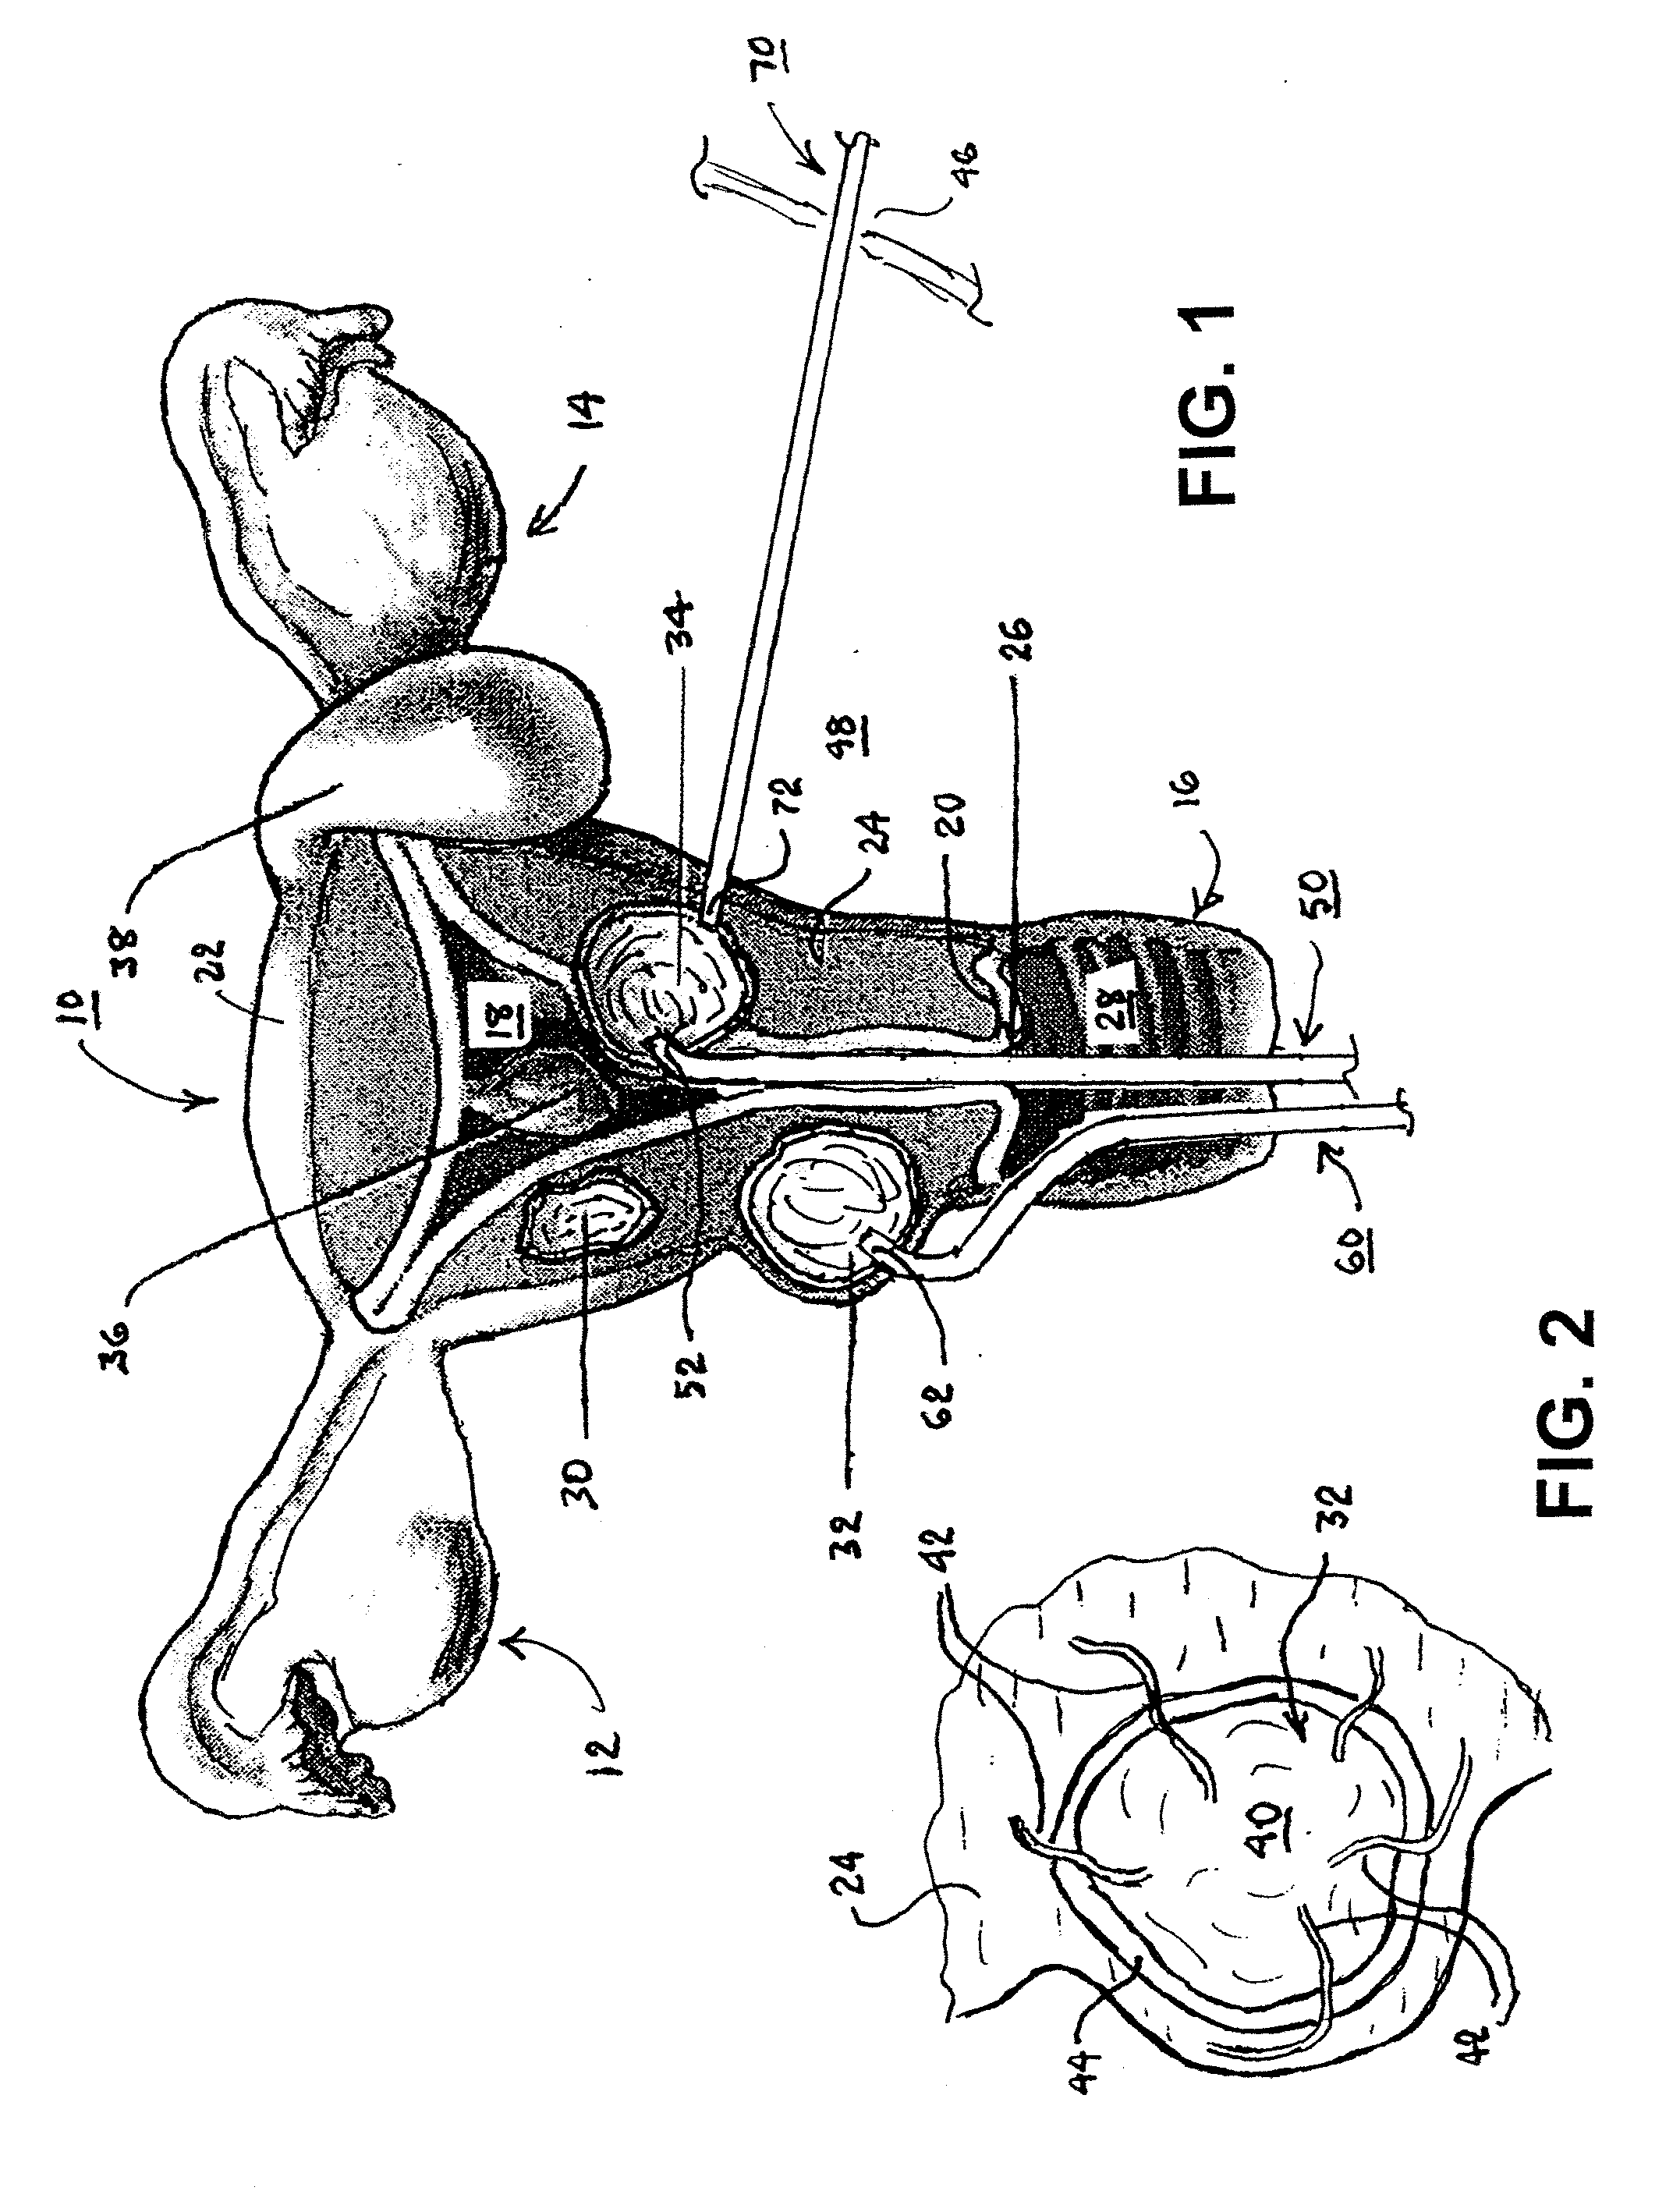 Methods and Apparatus for Treating Uterine Fibroids